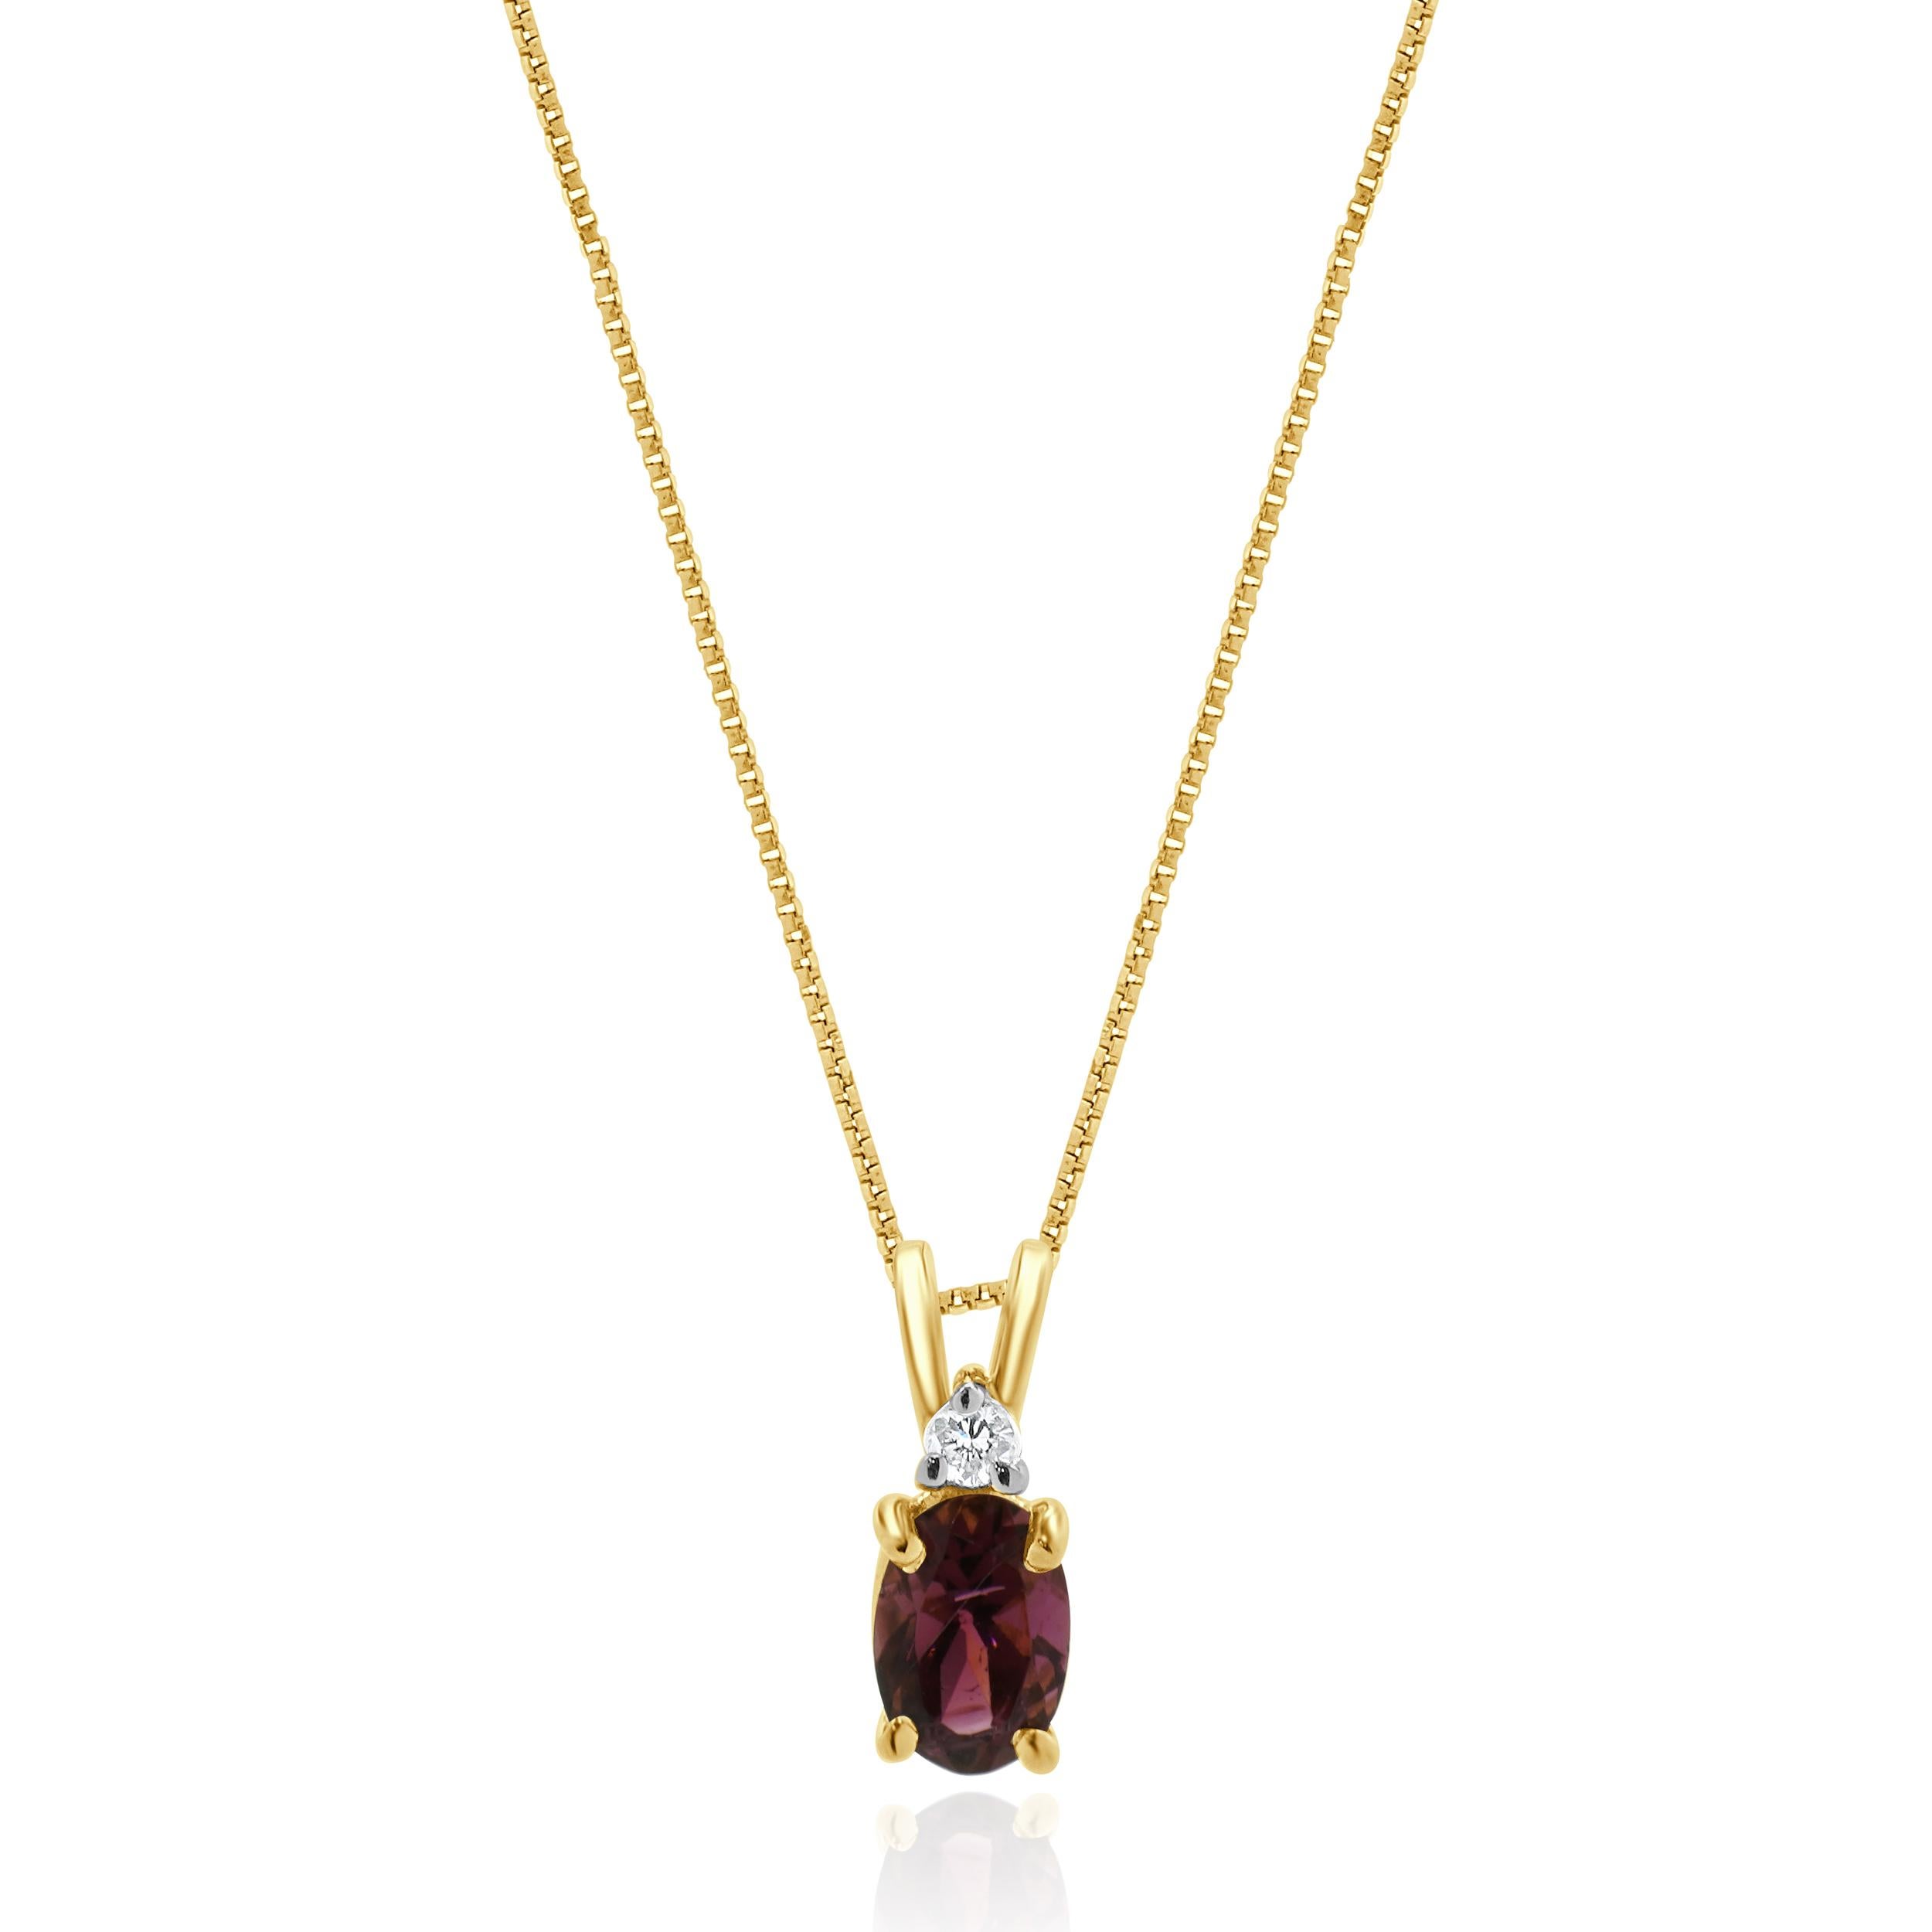 Designer: custom
Material: 14K yellow gold
Diamond: 1 round brilliant cut = 0.02ct
Color: H
Clarity: SI1
Pink Tourmaline: 1 oval cut = 0.40ct
Dimensions: necklace measures 16-inches in length
Weight: 1.54 grams
